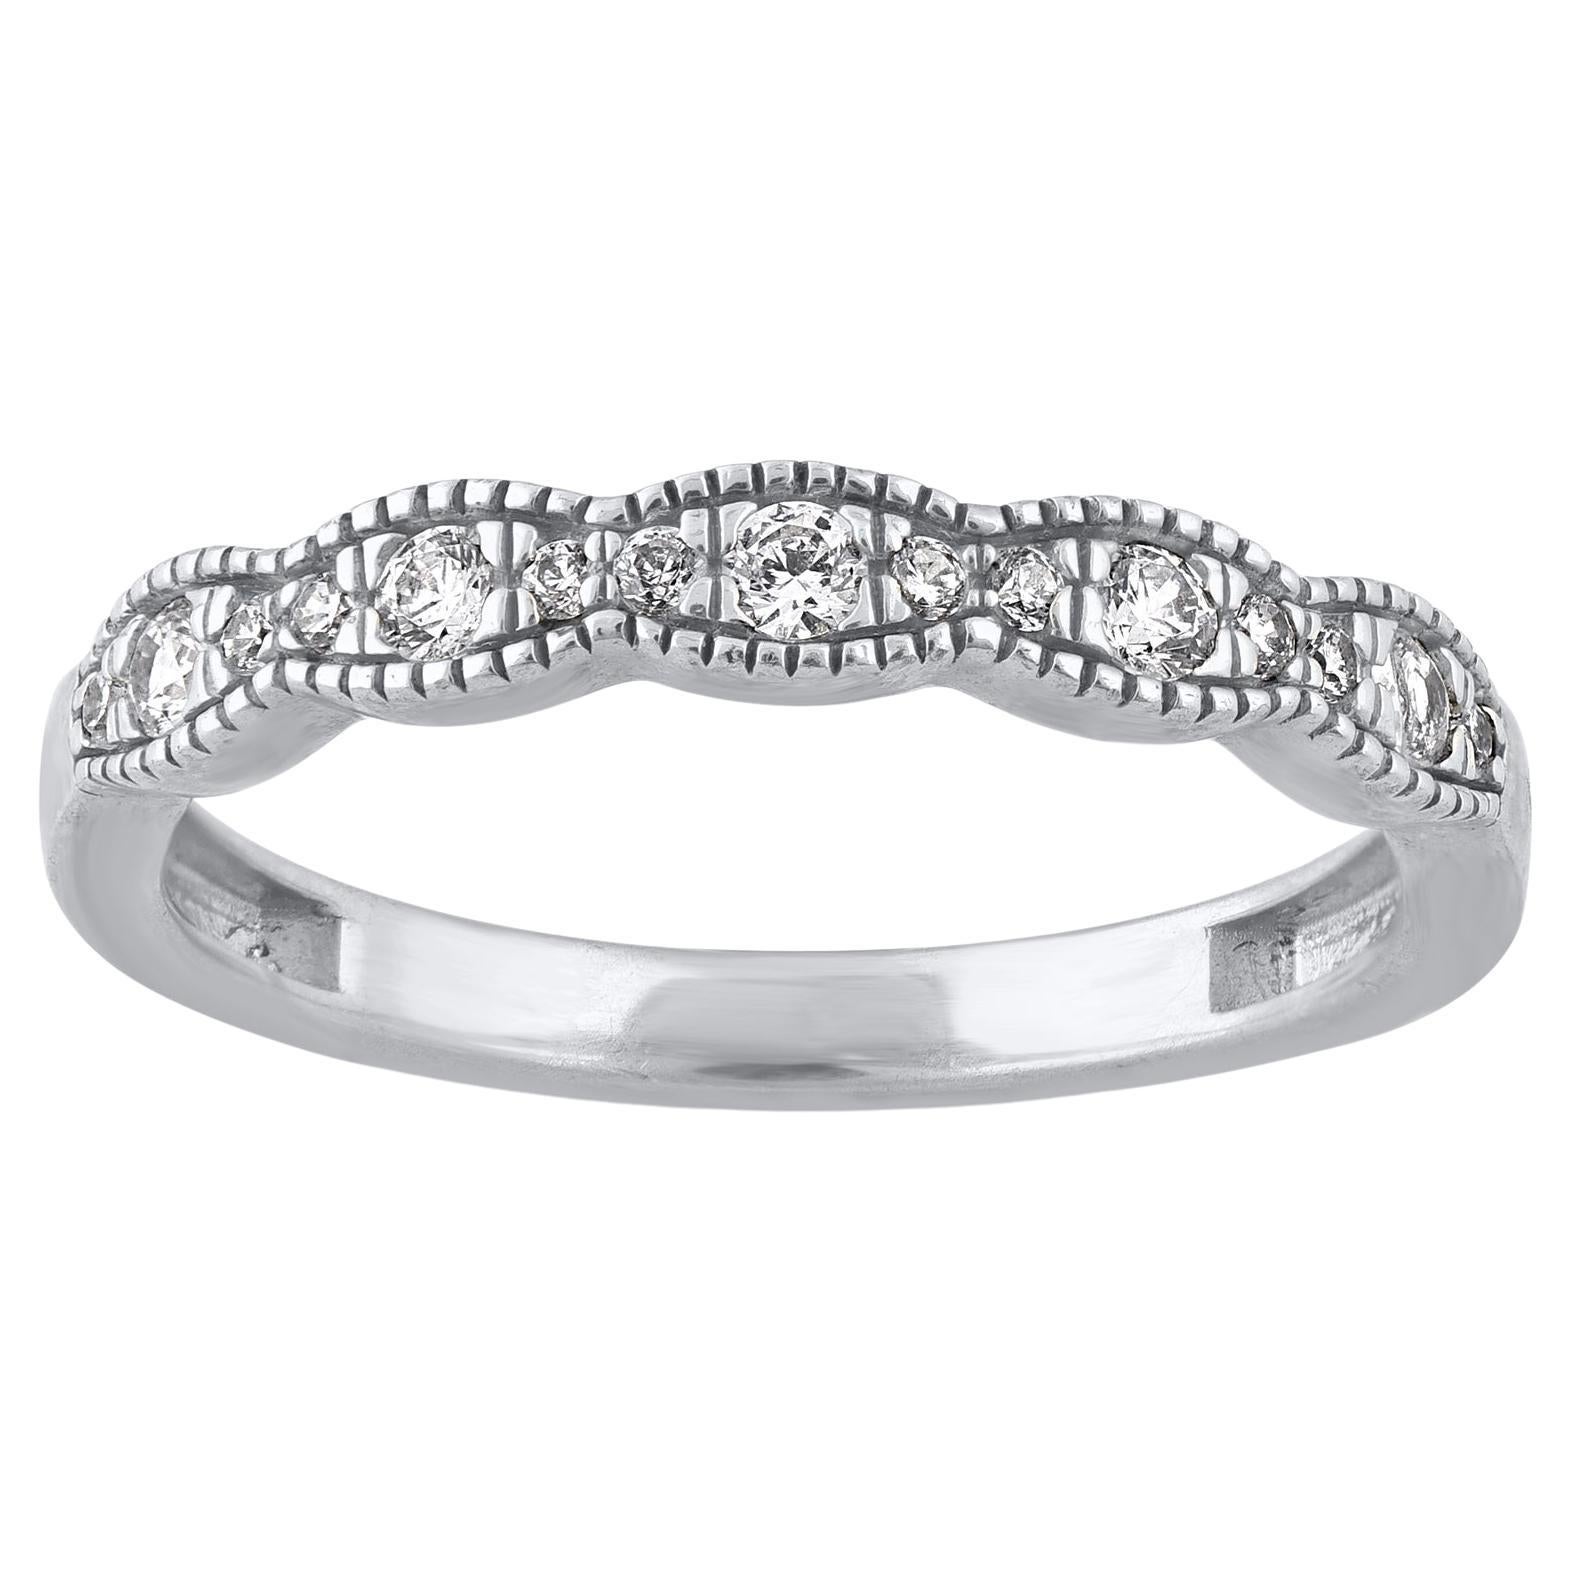 TJD 0.25 Carat Brilliant Diamond 14KT White Gold Stackable Wedding Band Ring